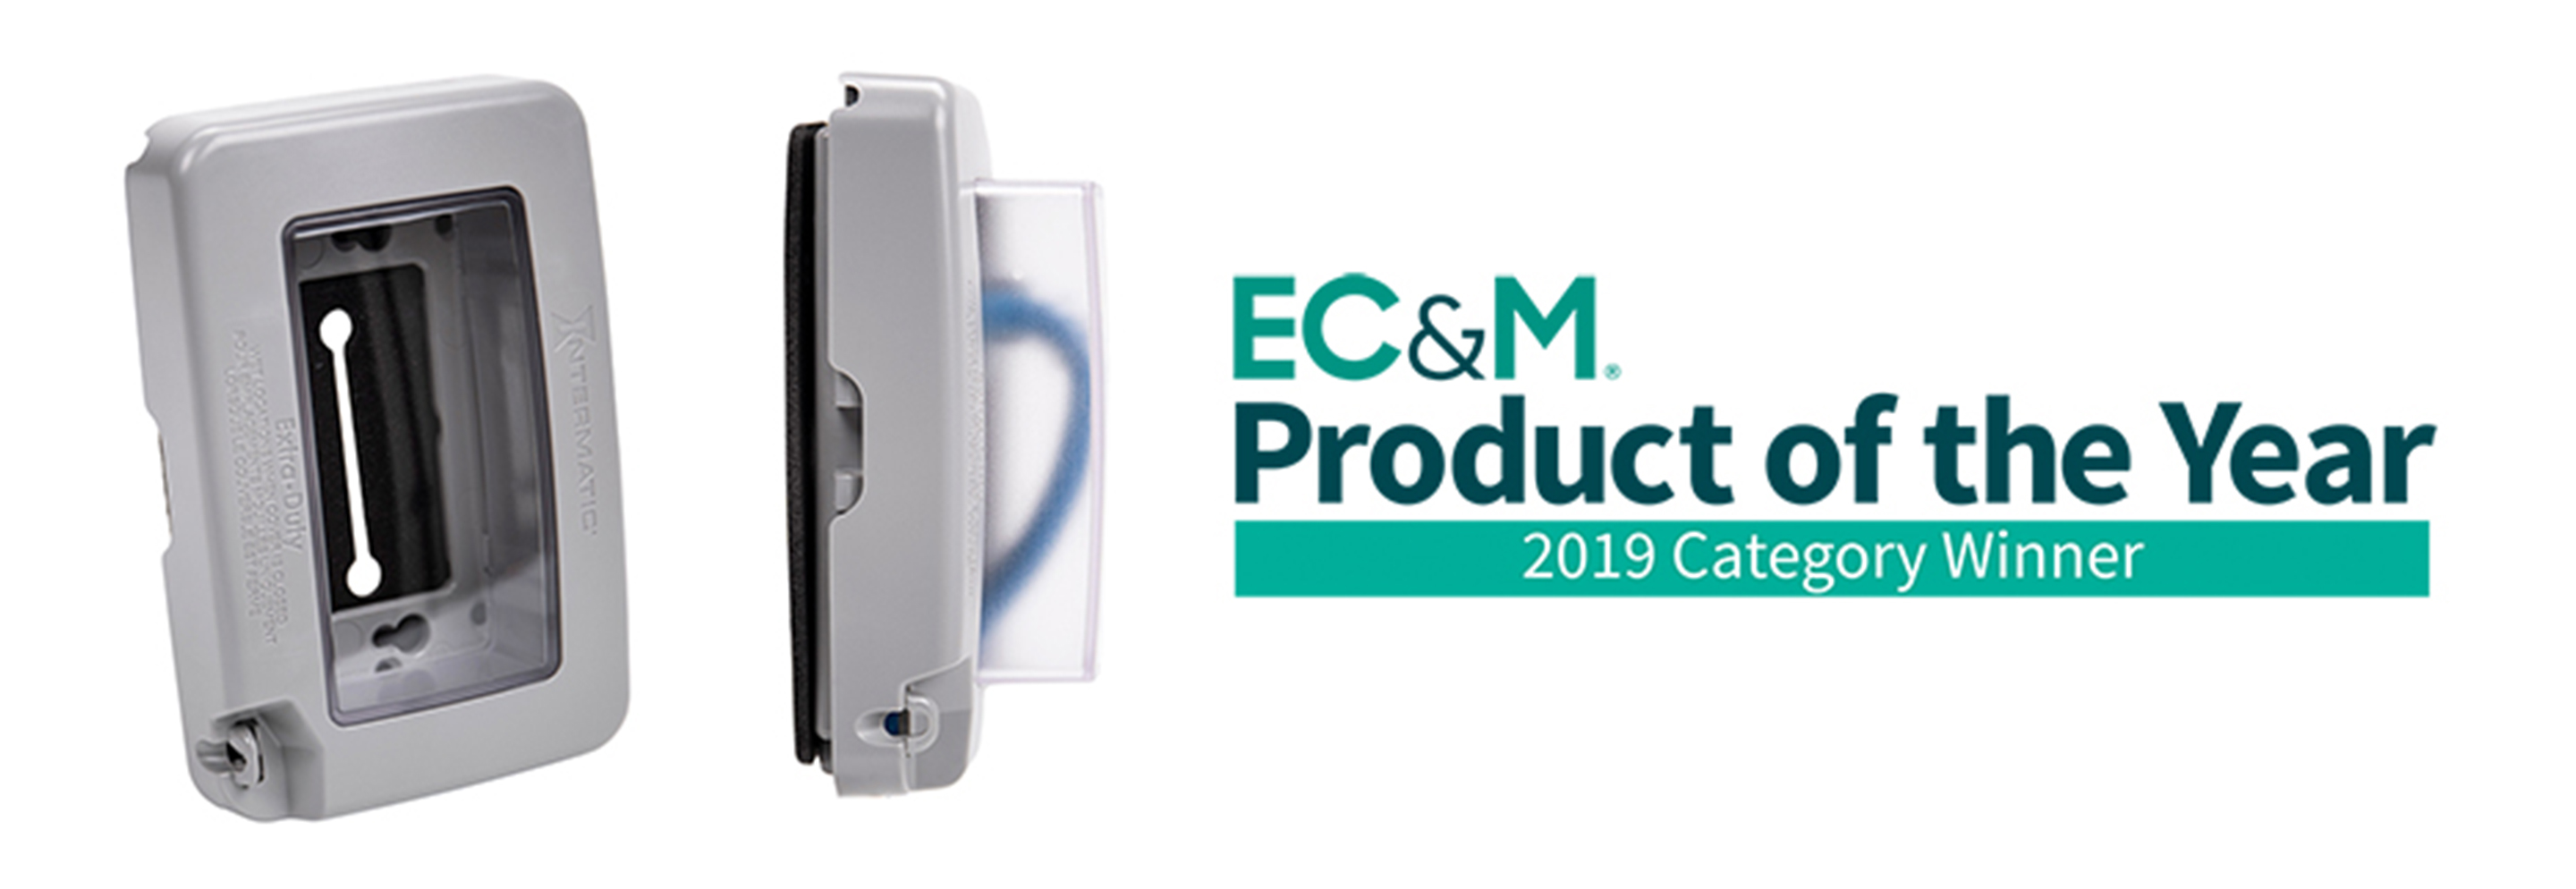 Low-Profile In-Use Covers Named Category Winner by EC&M Magazine!